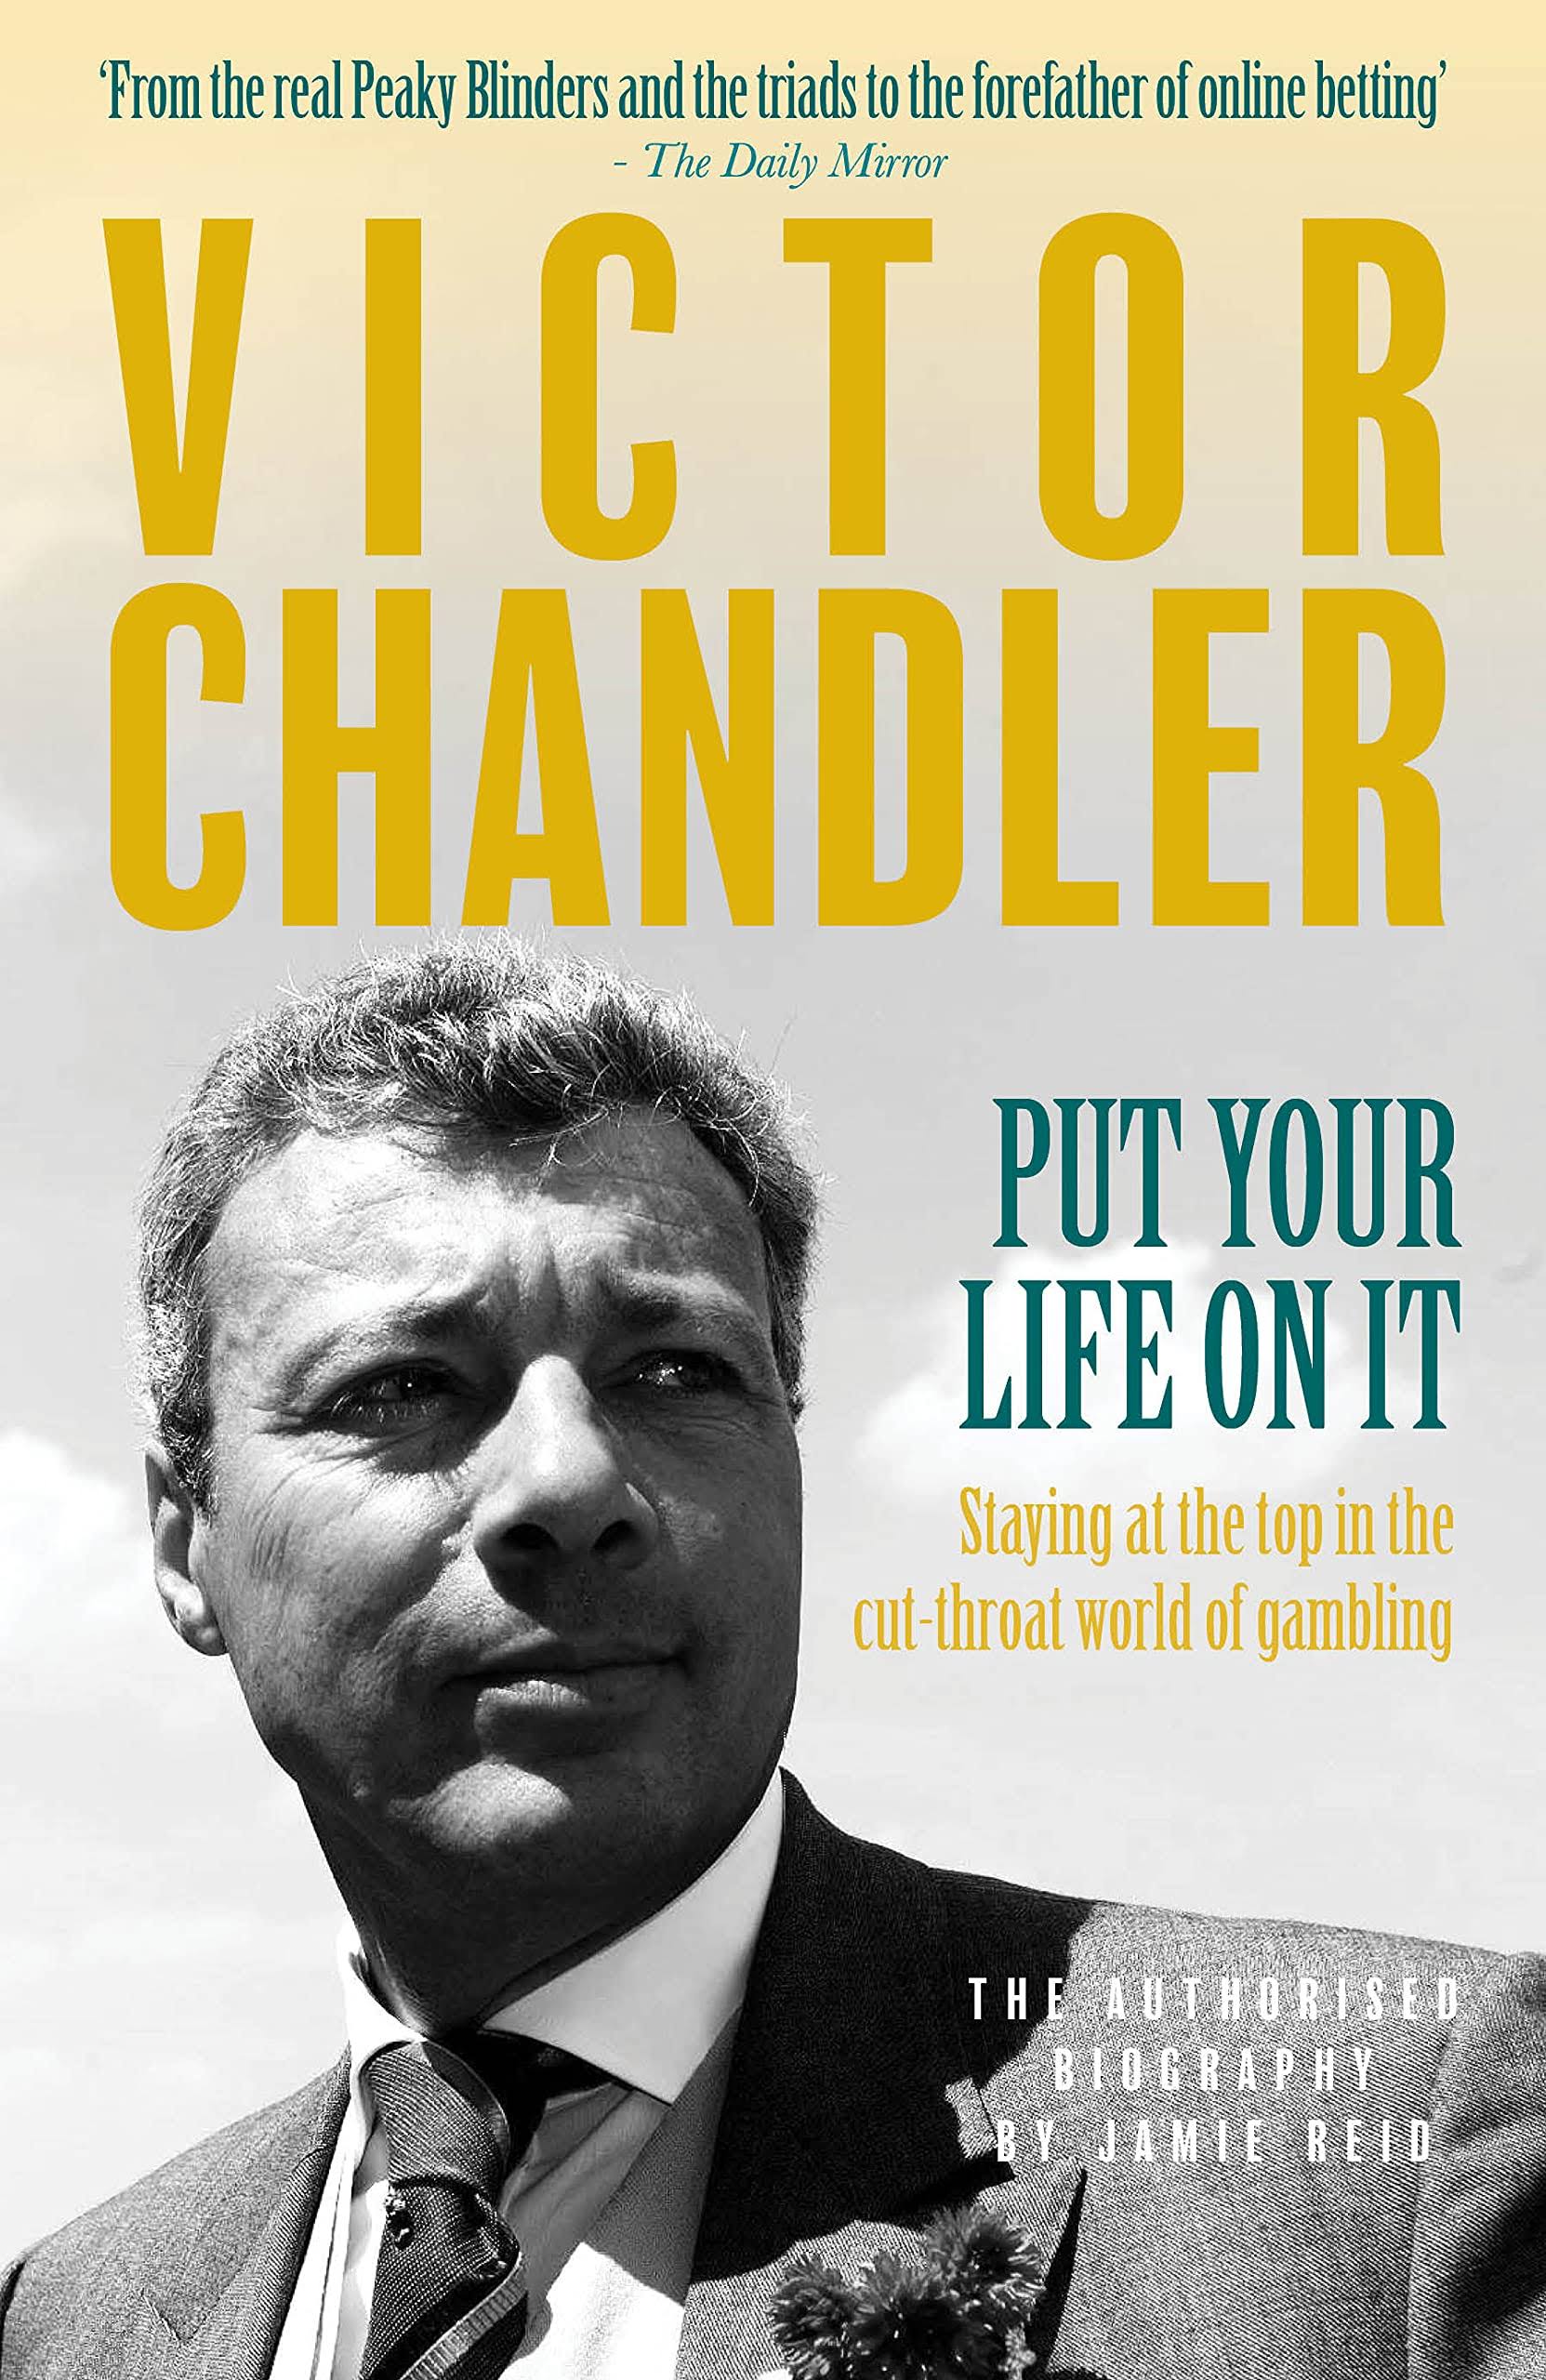 Put Your Life On It: Staying At The Top In The Cut-Throat World Of Gambling [Book]